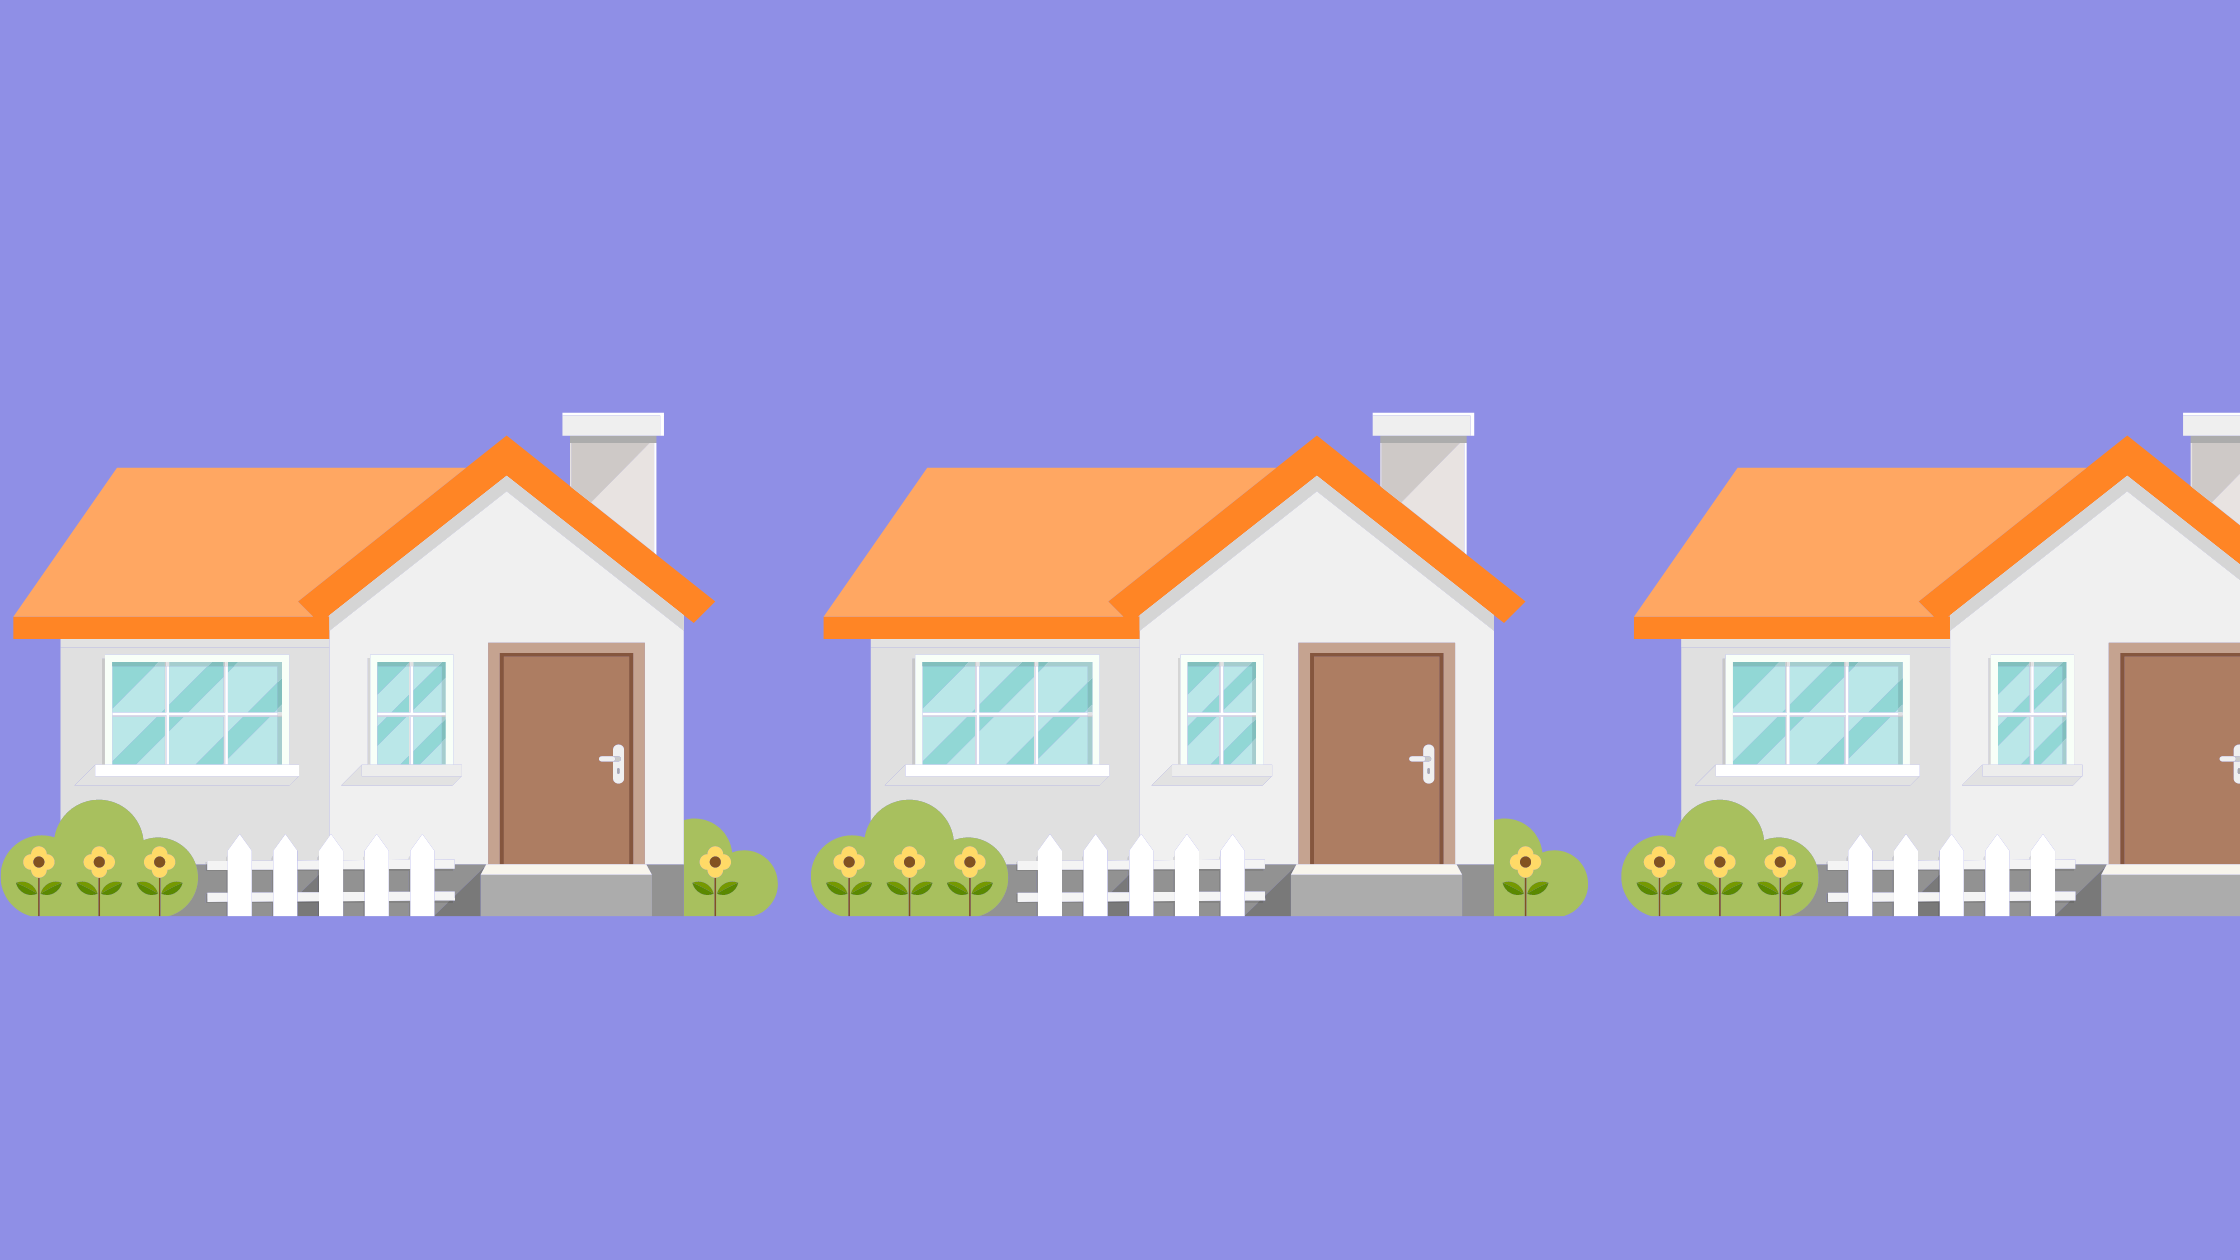 A row of small houses with picket fences